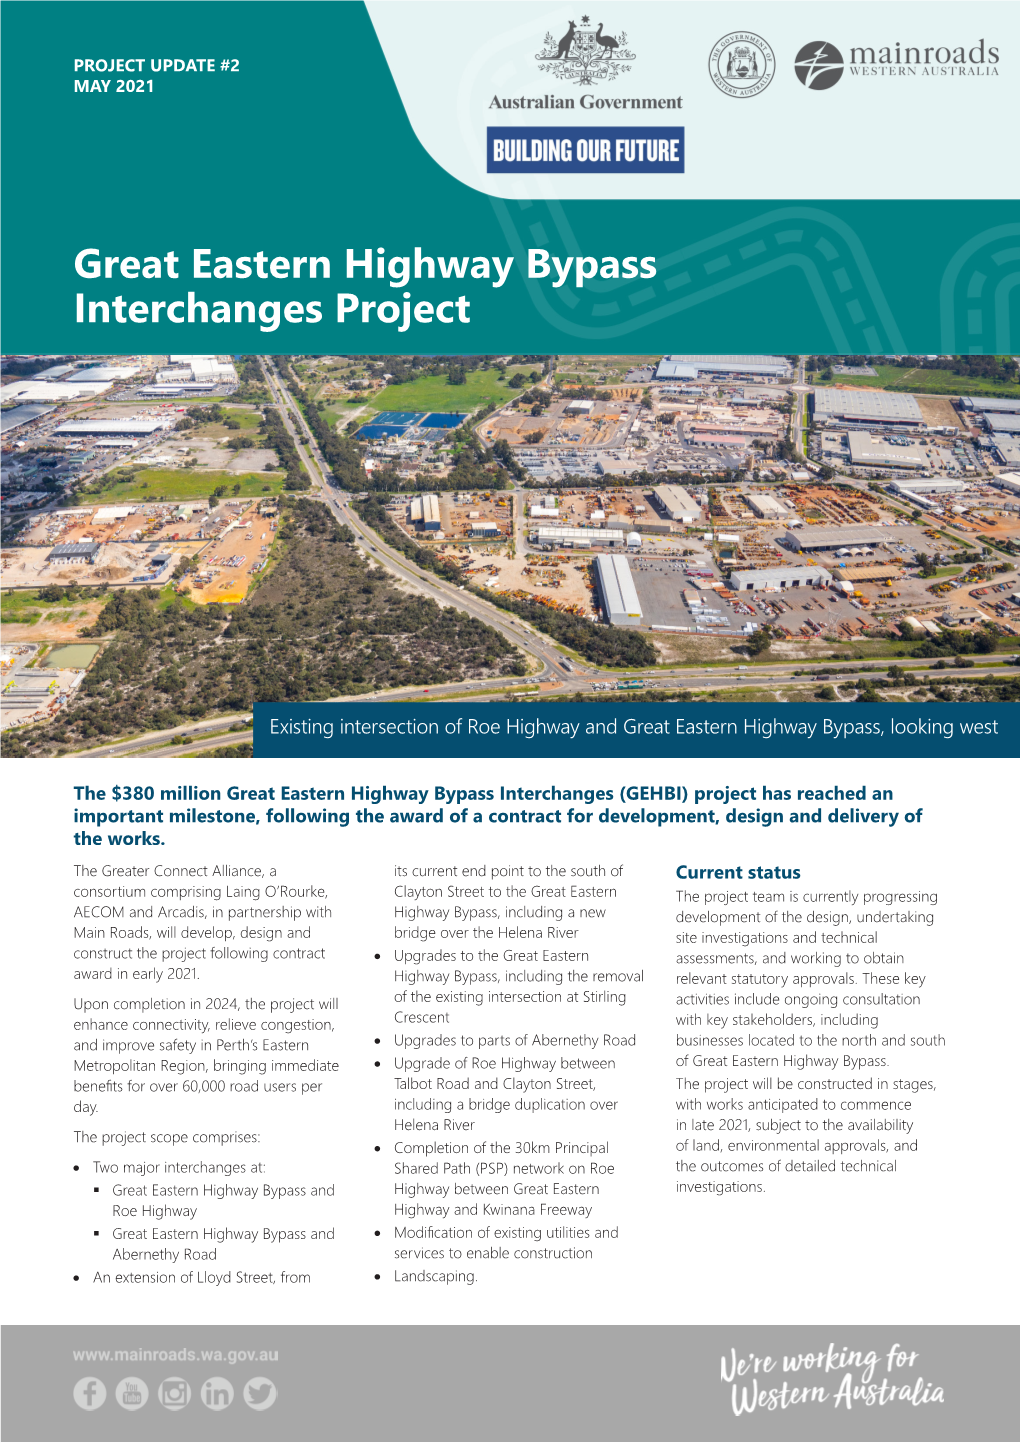 Great Eastern Highway Bypass Interchanges Project